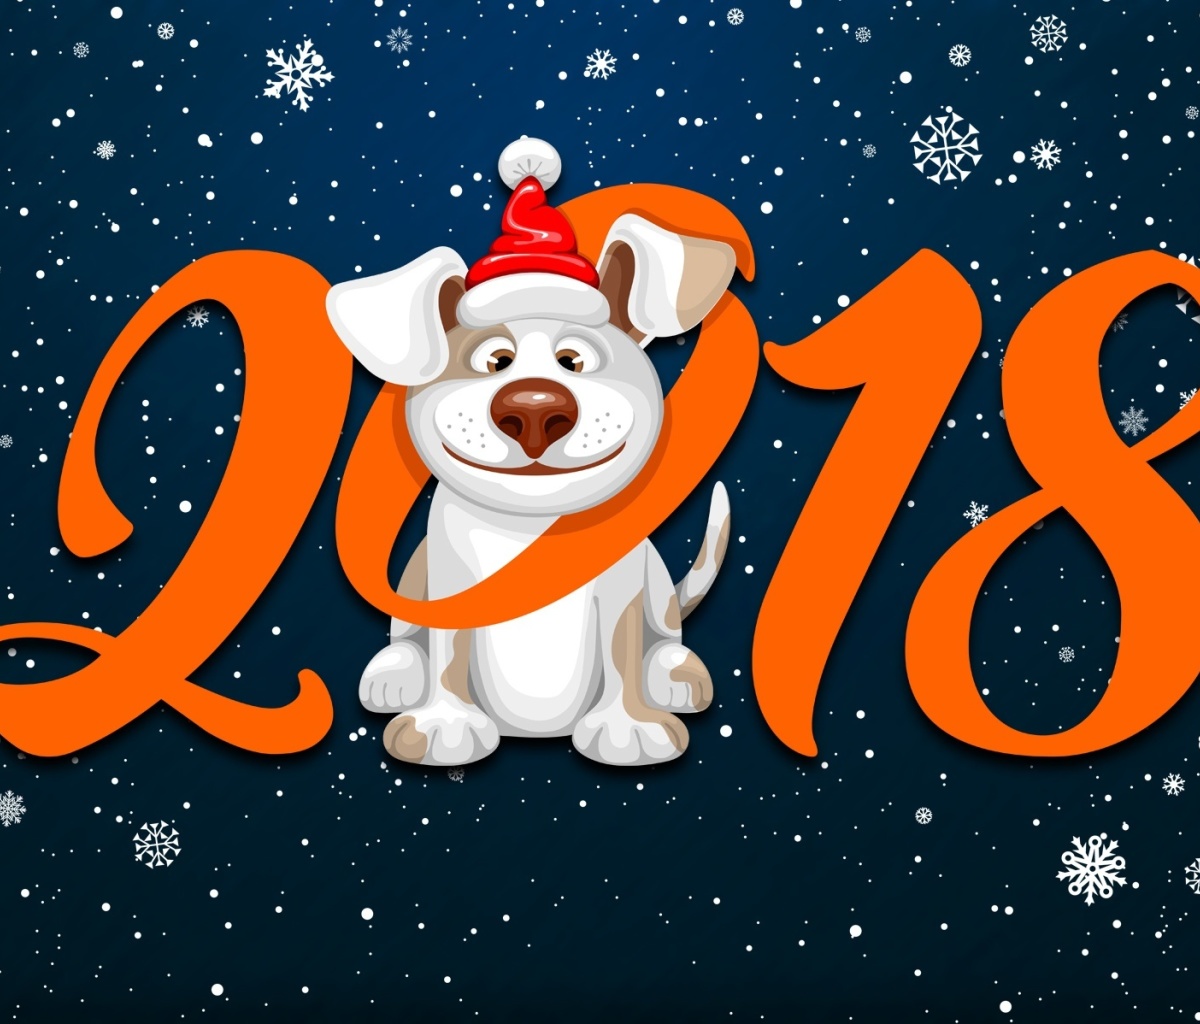 Das New Year Dog 2018 with Snow Wallpaper 1200x1024